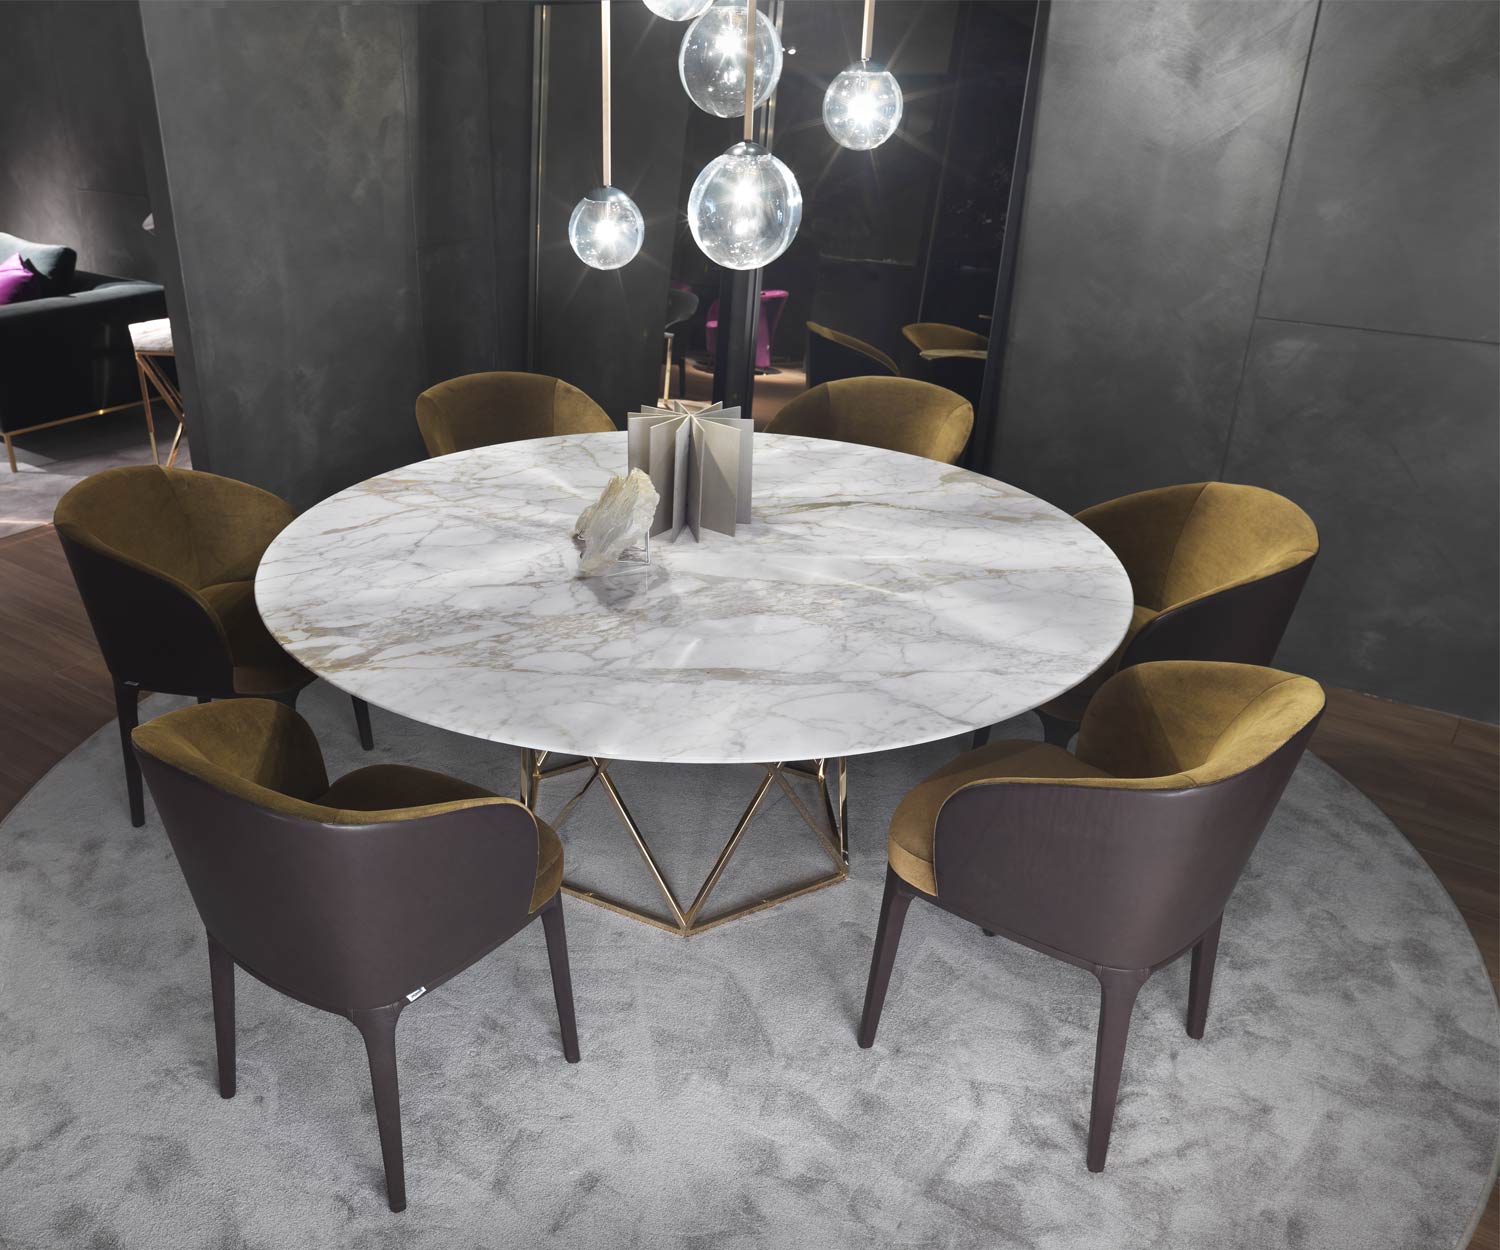 Design noble dining table Marelli Tatlin marble white as a group with chairs